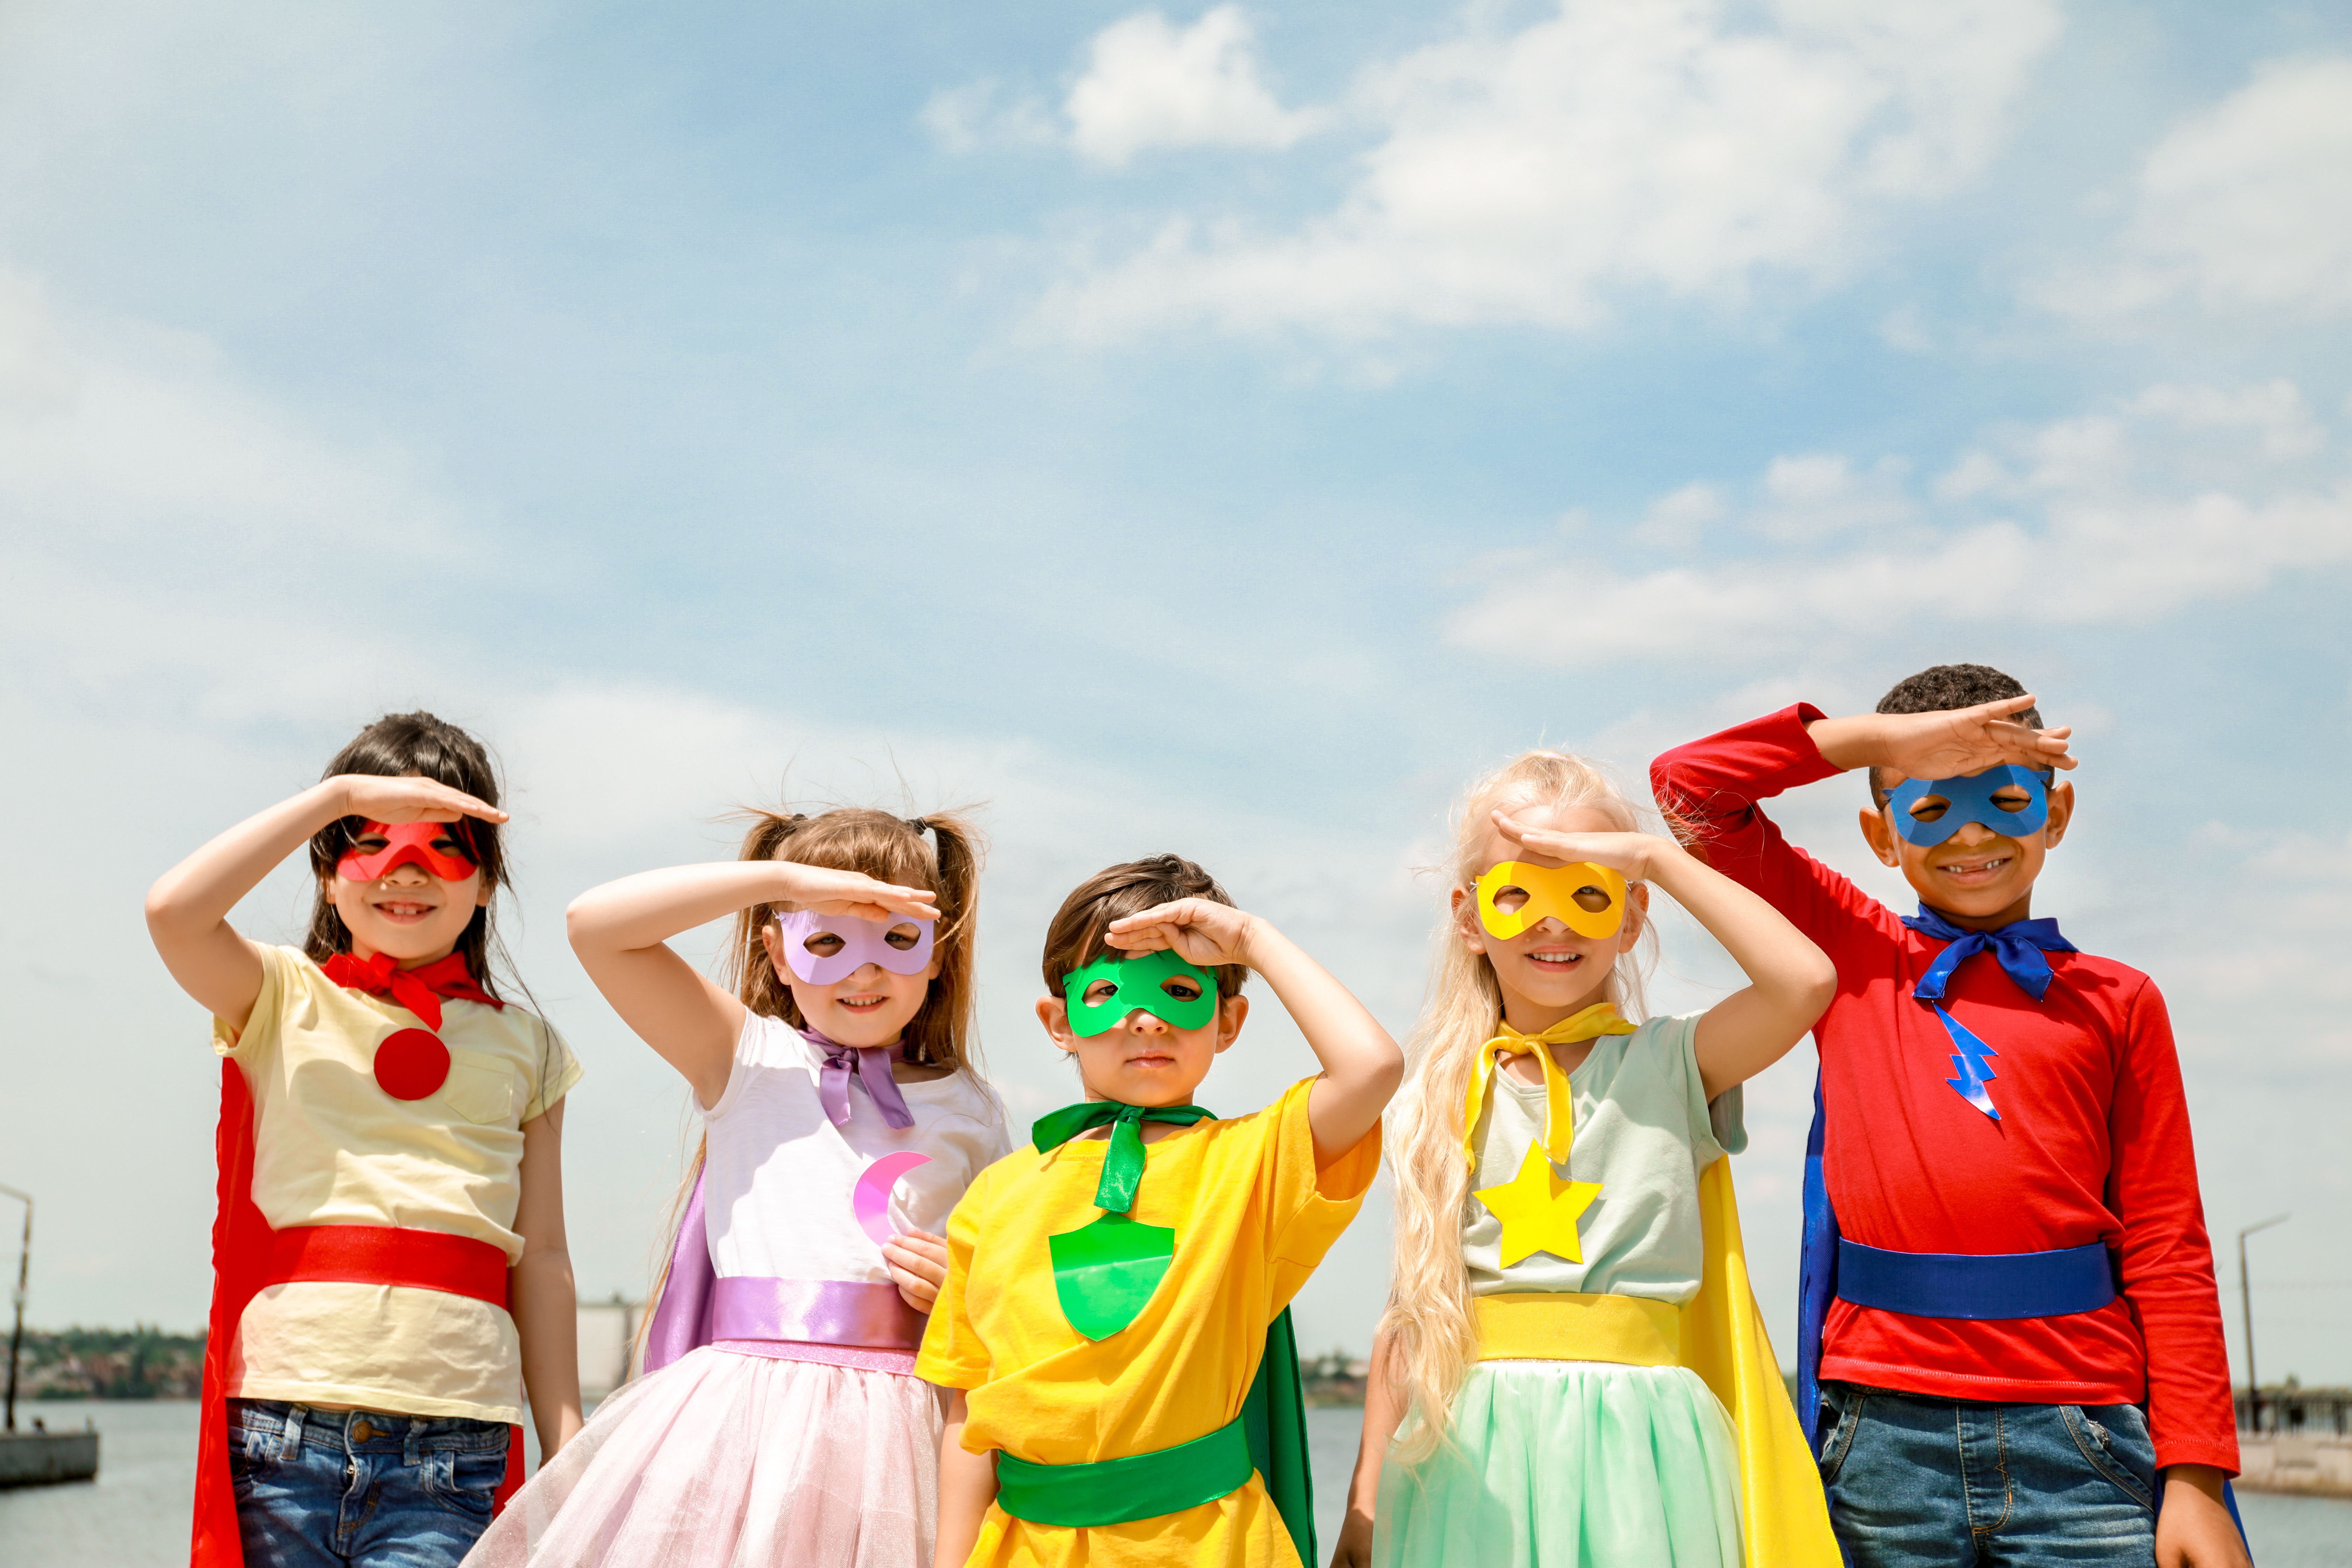 A picture of a group of children at a superhero themed birthday party, inspired by The Real Food Academy.